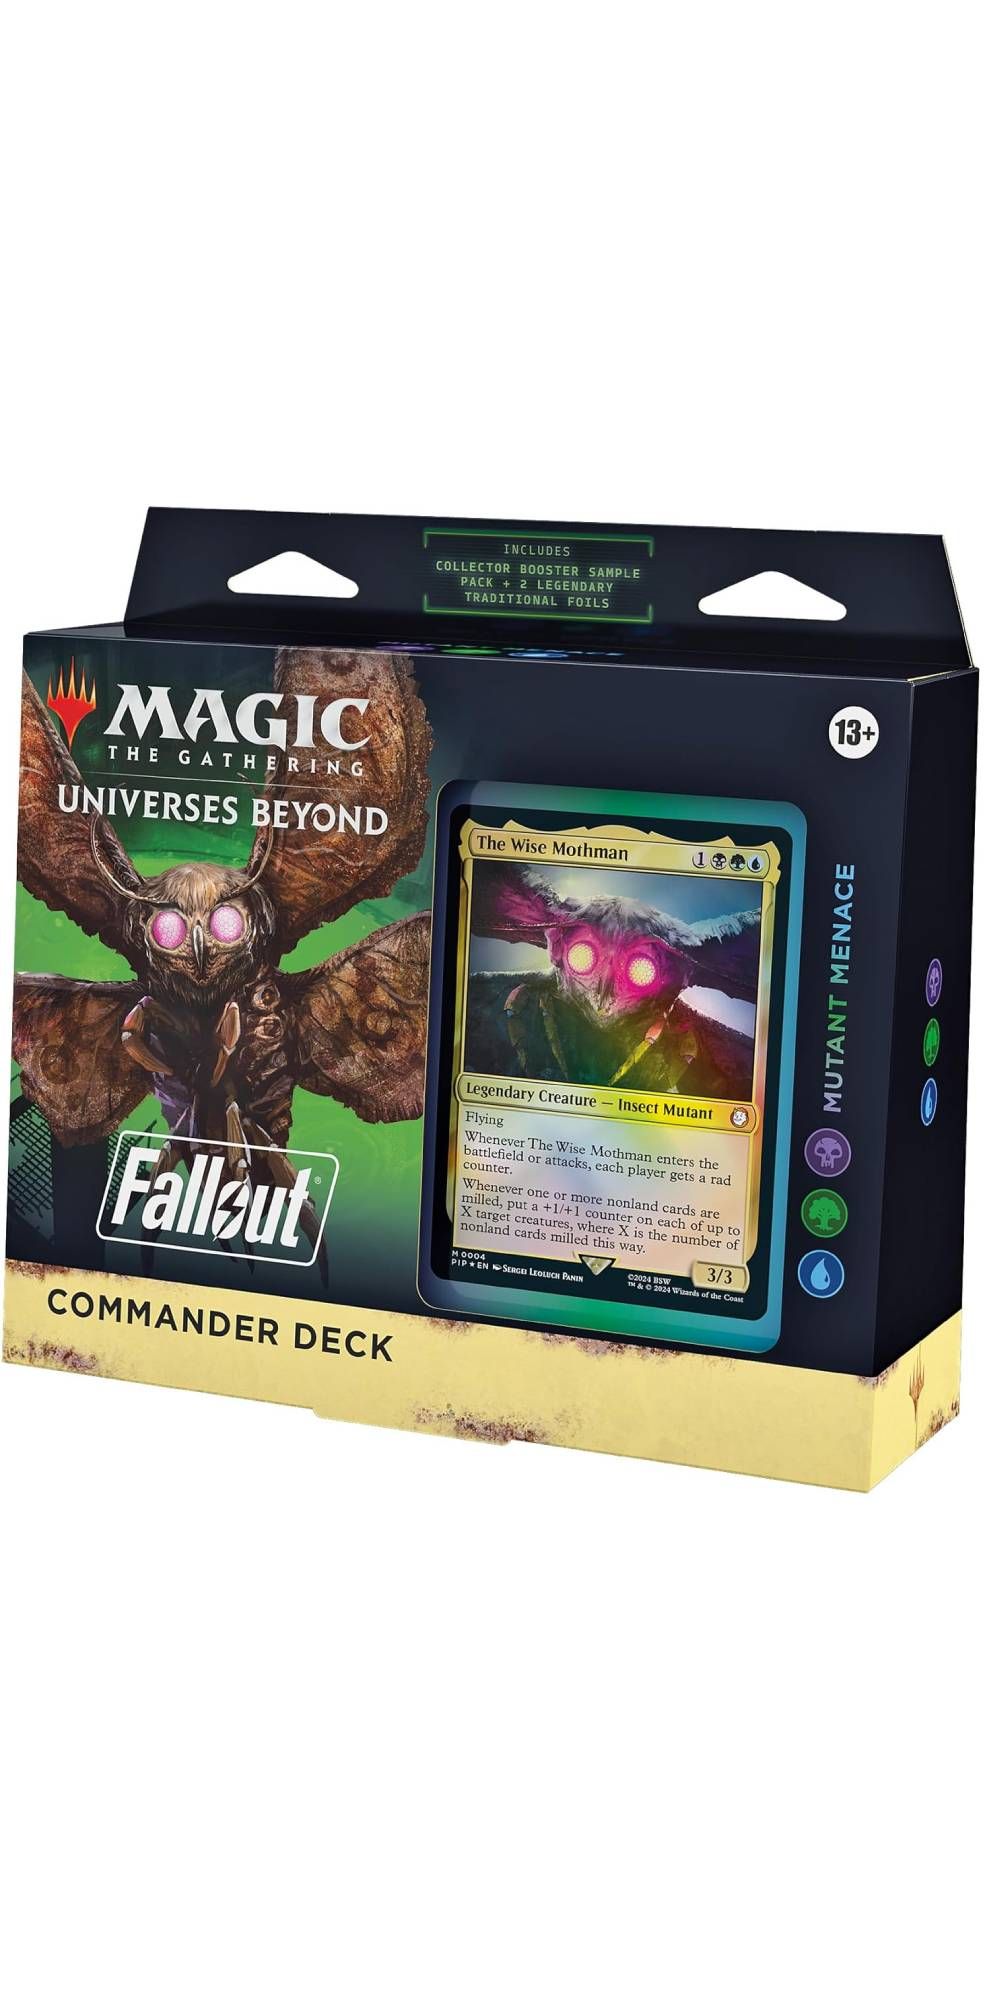 What To Buy For Magic: The Gathering's Universes Beyond: Fallout